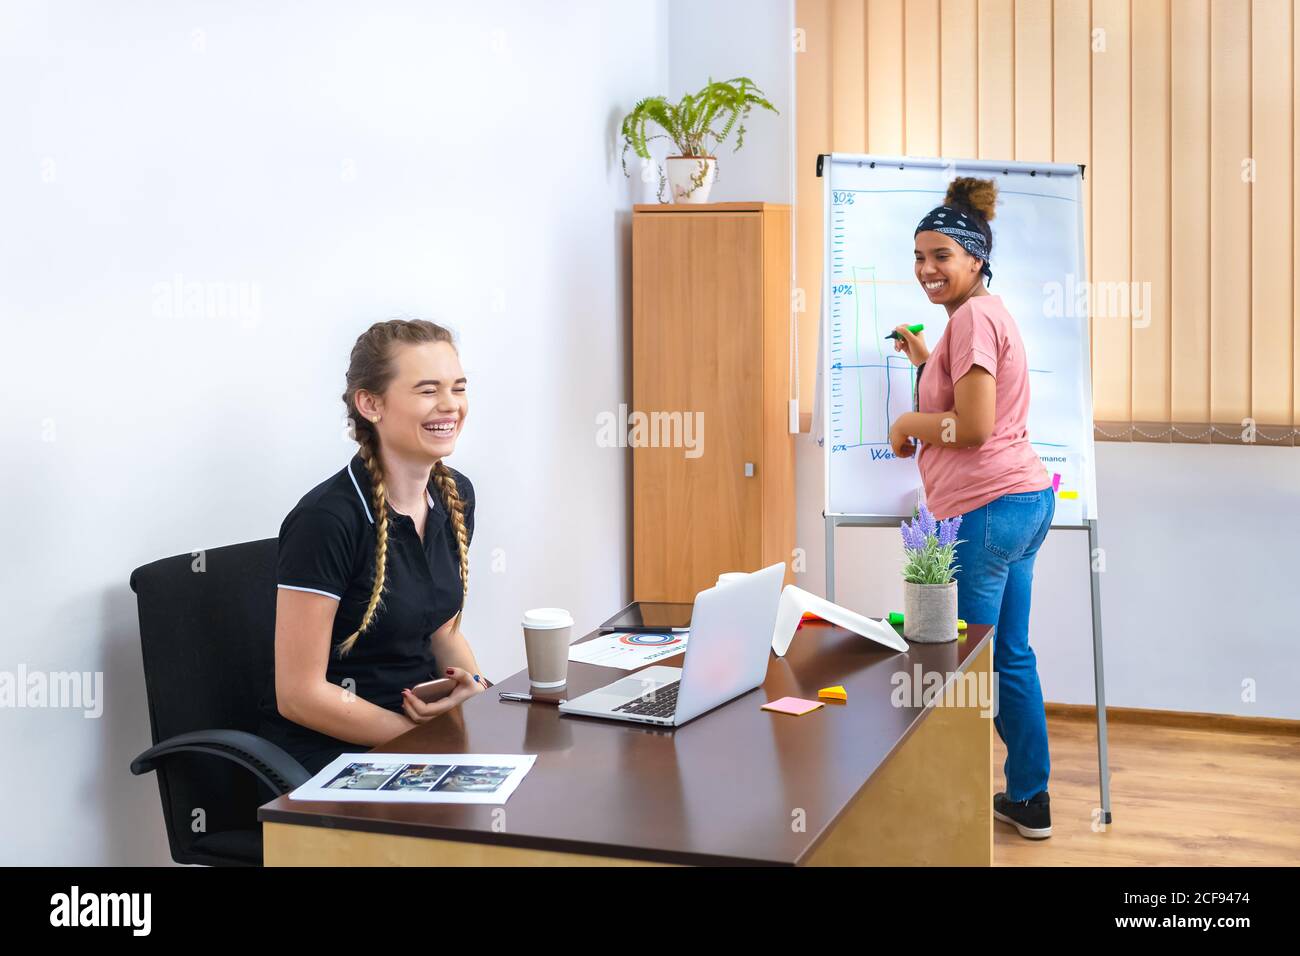 Two smiling multi-ethnic women having fun at work brainstorming with notes on flipchart in office Stock Photo